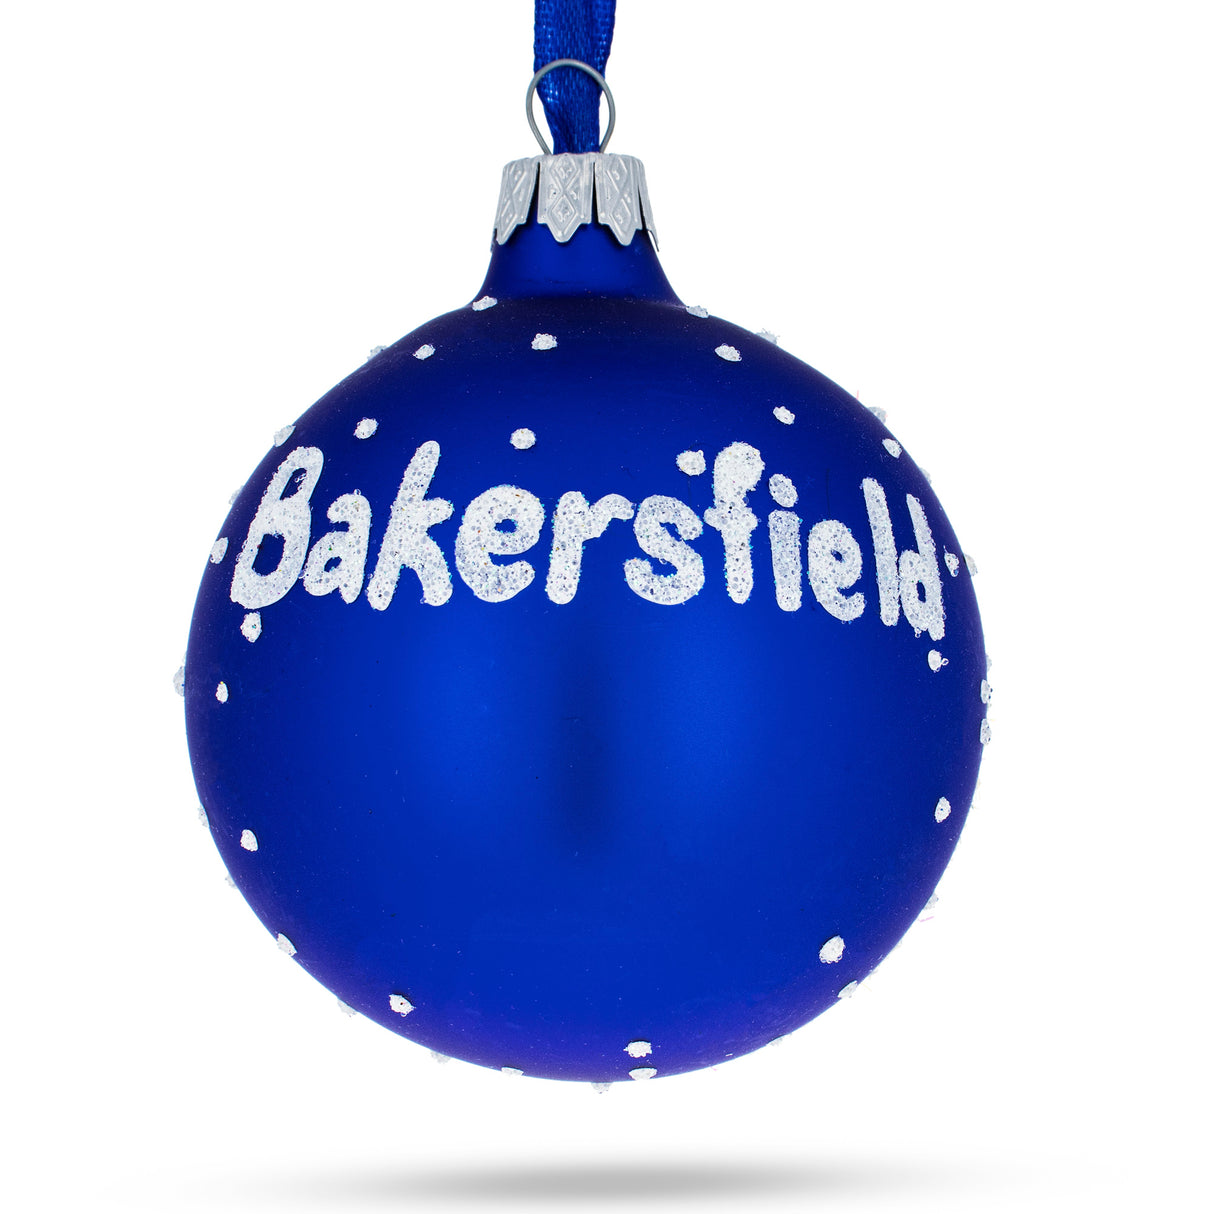 Buy Christmas Ornaments > Travel > North America > USA > California > Bakersfield by BestPysanky Online Gift Ship